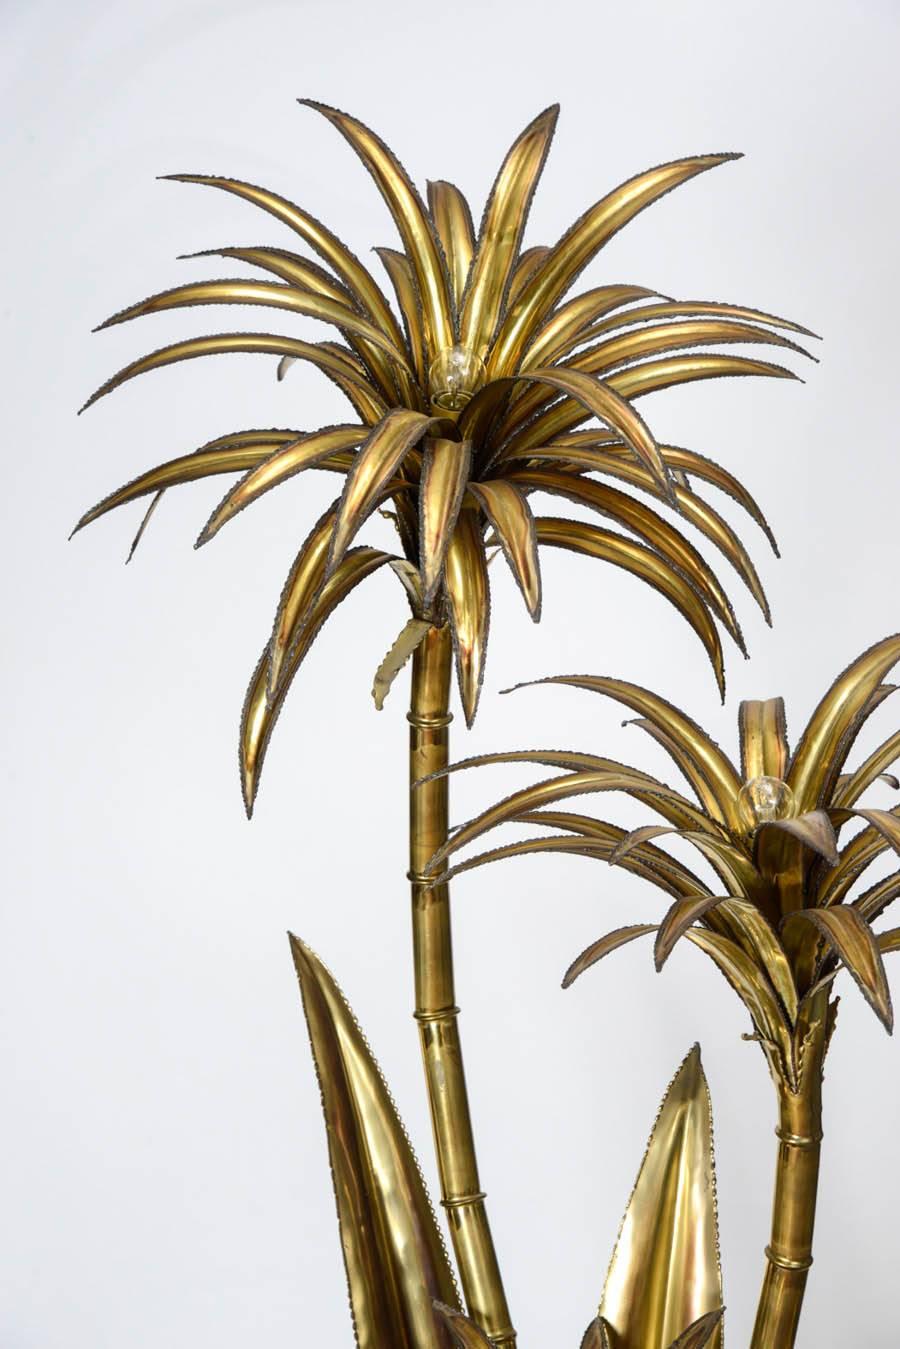 Famous palm trees floor lamp by Maison Jansen. This piece is made of a resin foot and three gilded metal palm trees and big leaves. In the center of the trees is hidden a bulb.
Typical French design from the 1970s, very decorative.